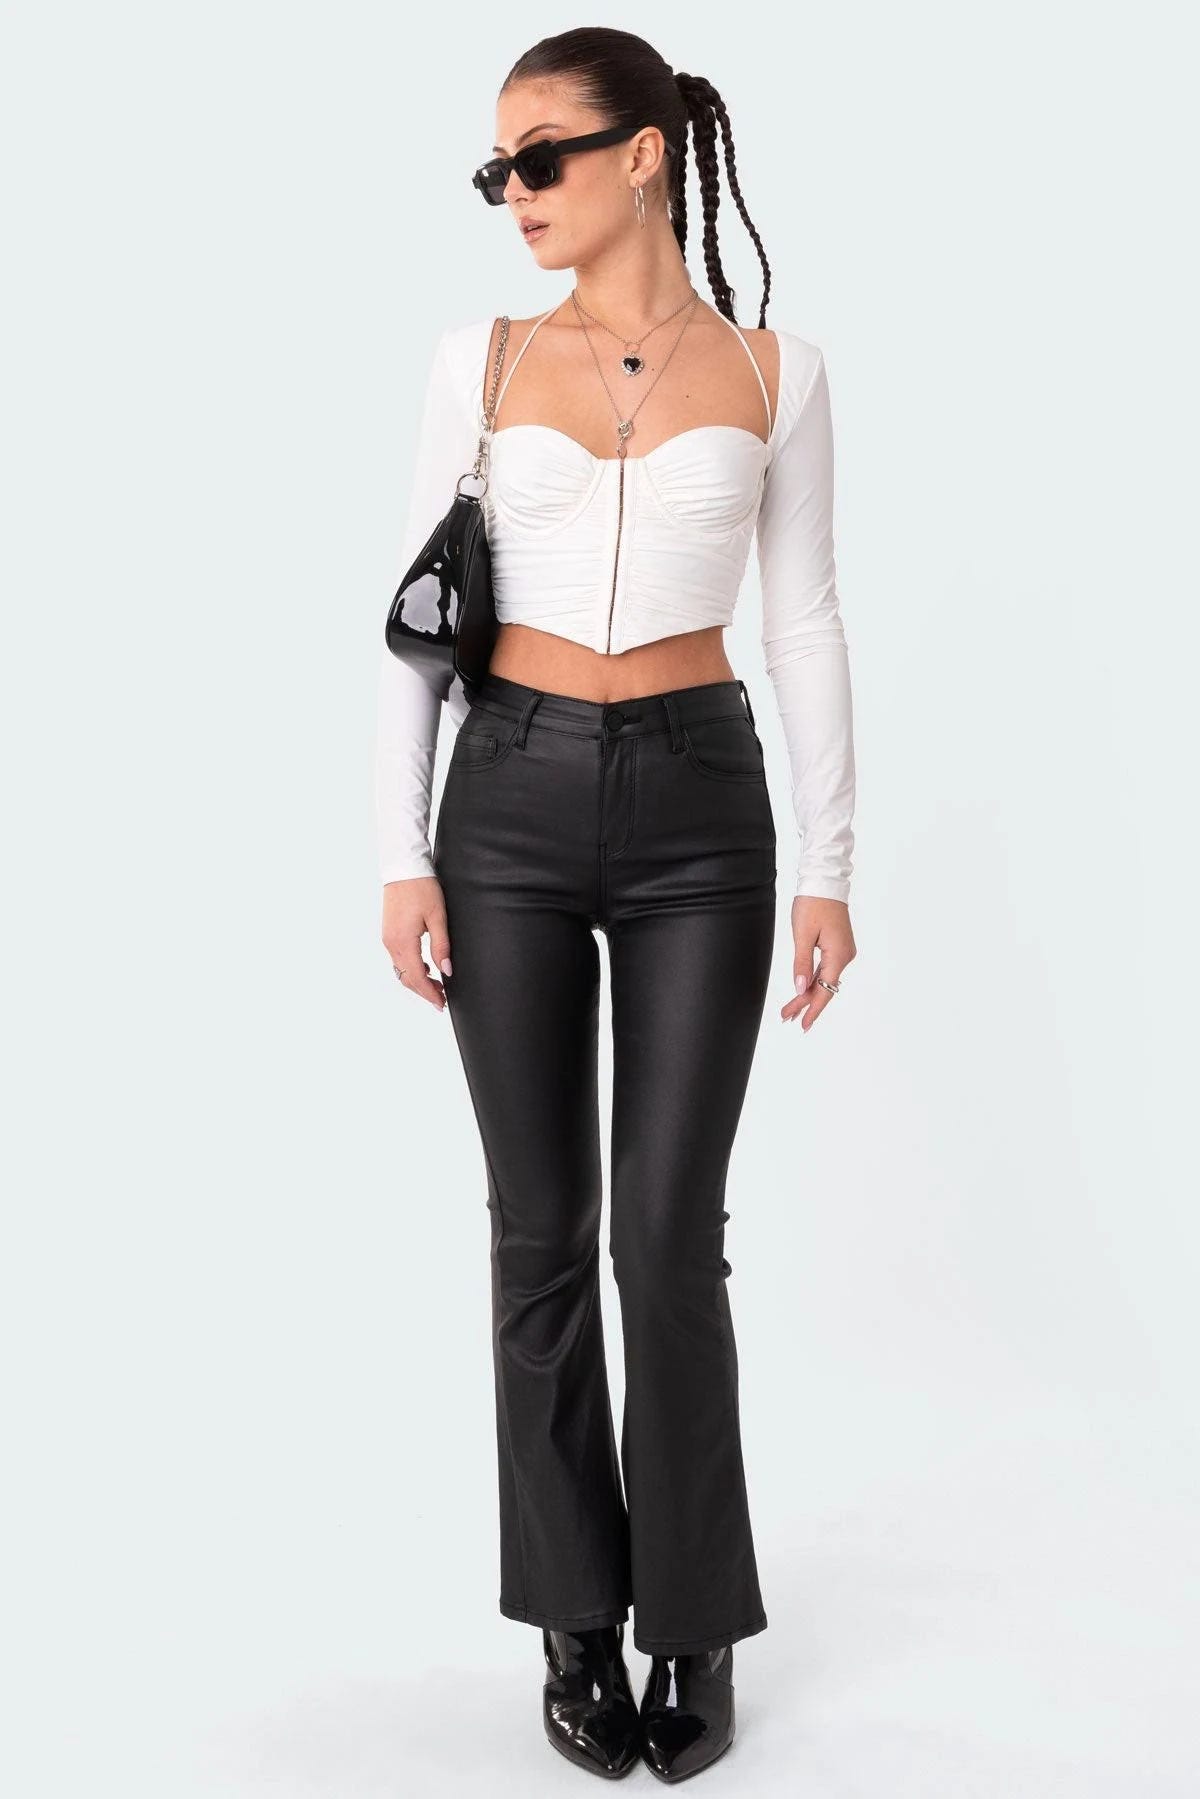 Petite Luna Faux Leather Flare Jeans - Stylish Black for Heights up to 5'4 | Image